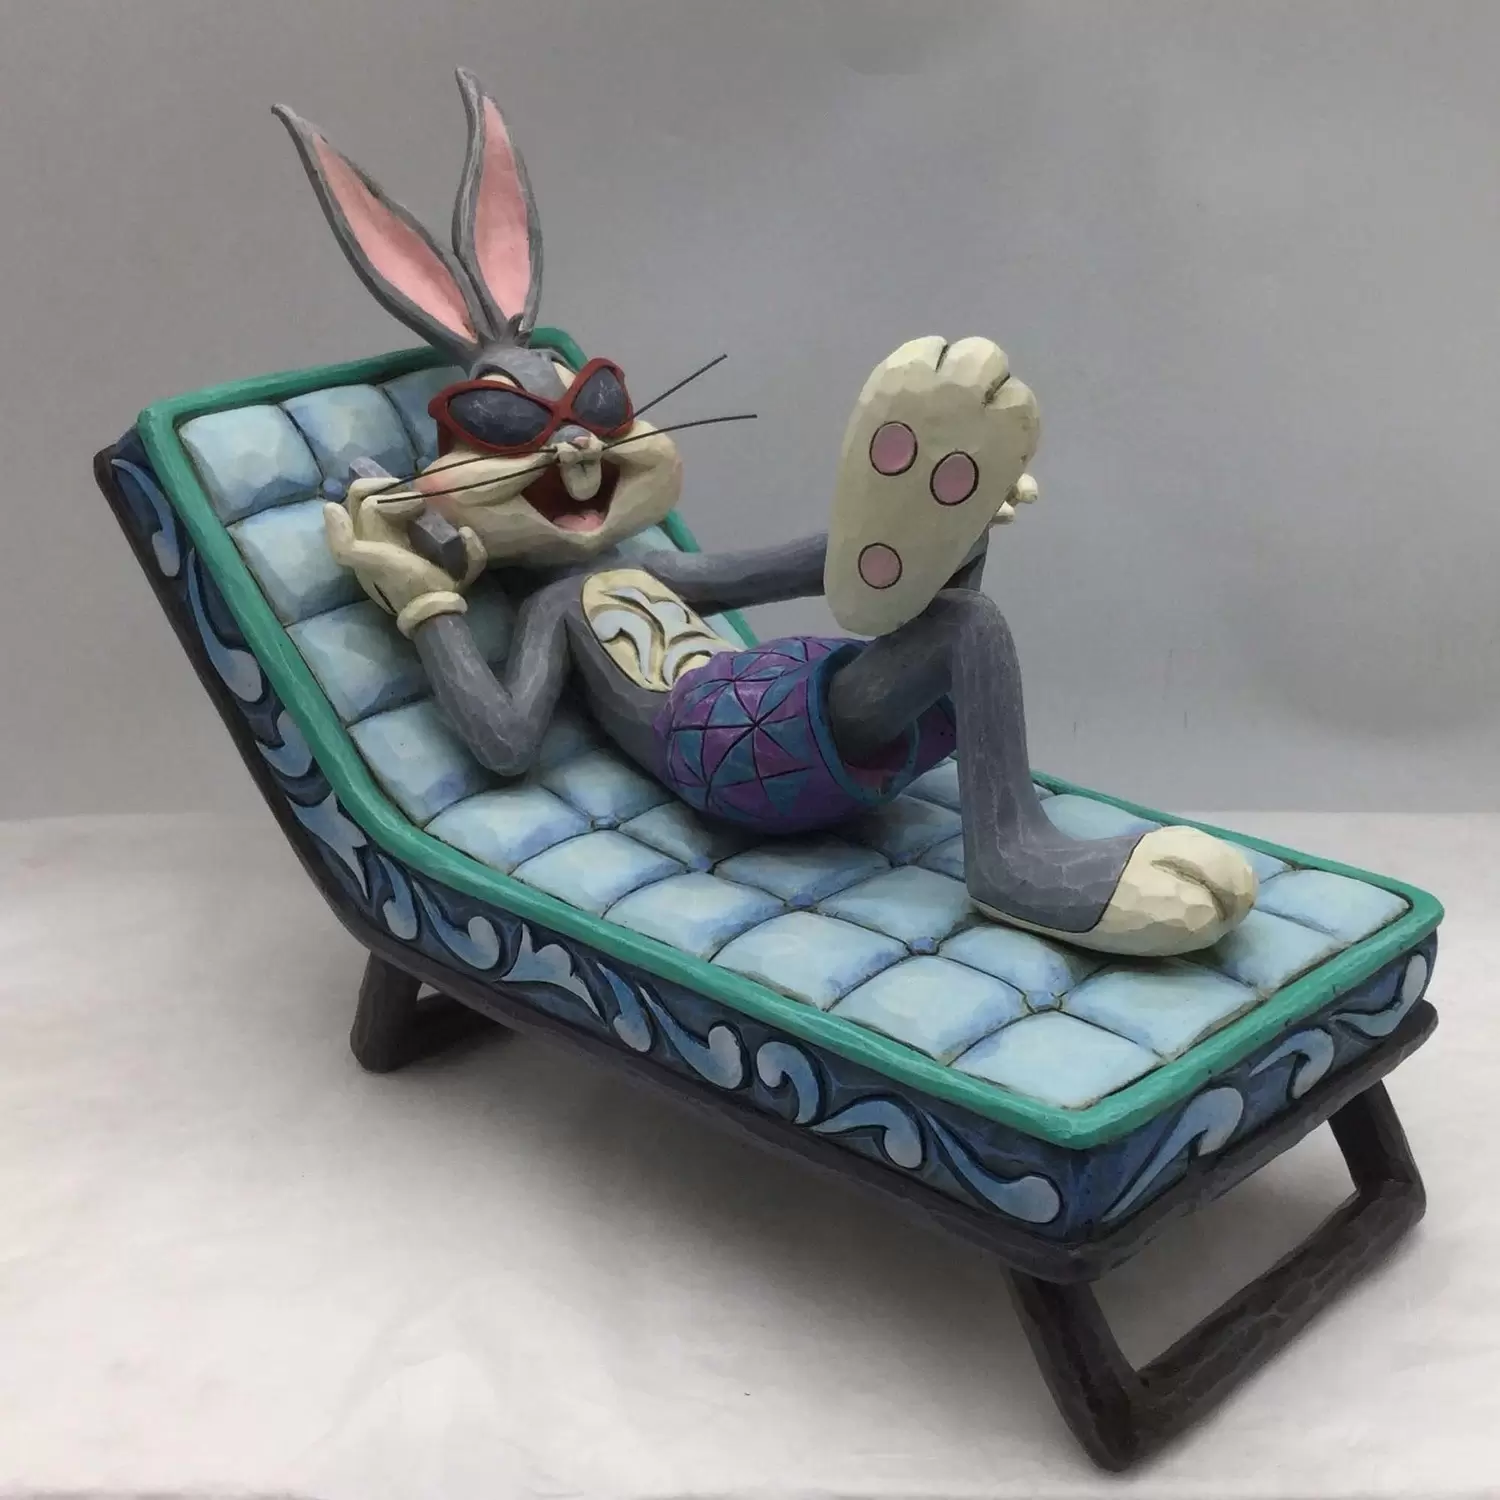 Looney Tunes characters by Jim Shore - Hollywood Hare - Bugs on Lounger